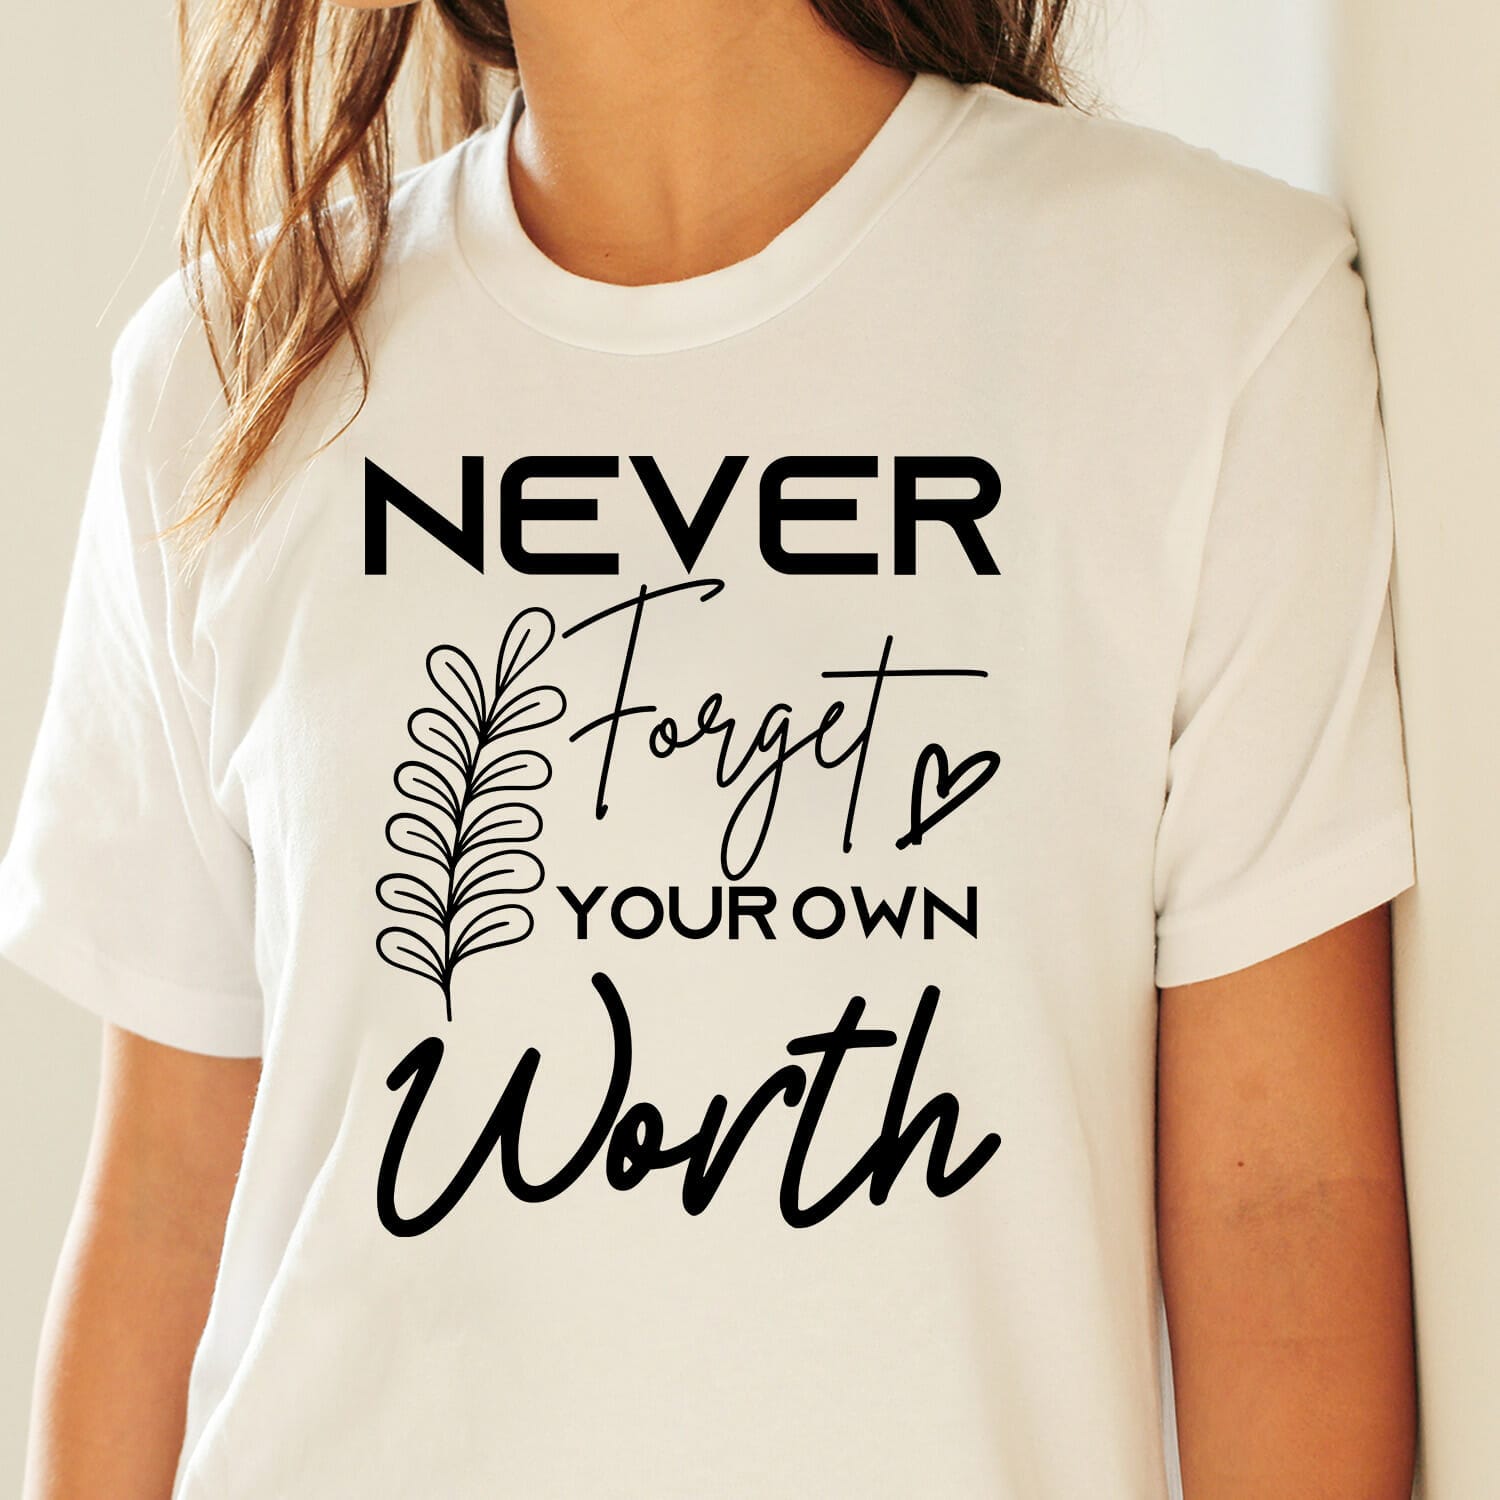 Never Forget your own worth Motivational T-shirt Design